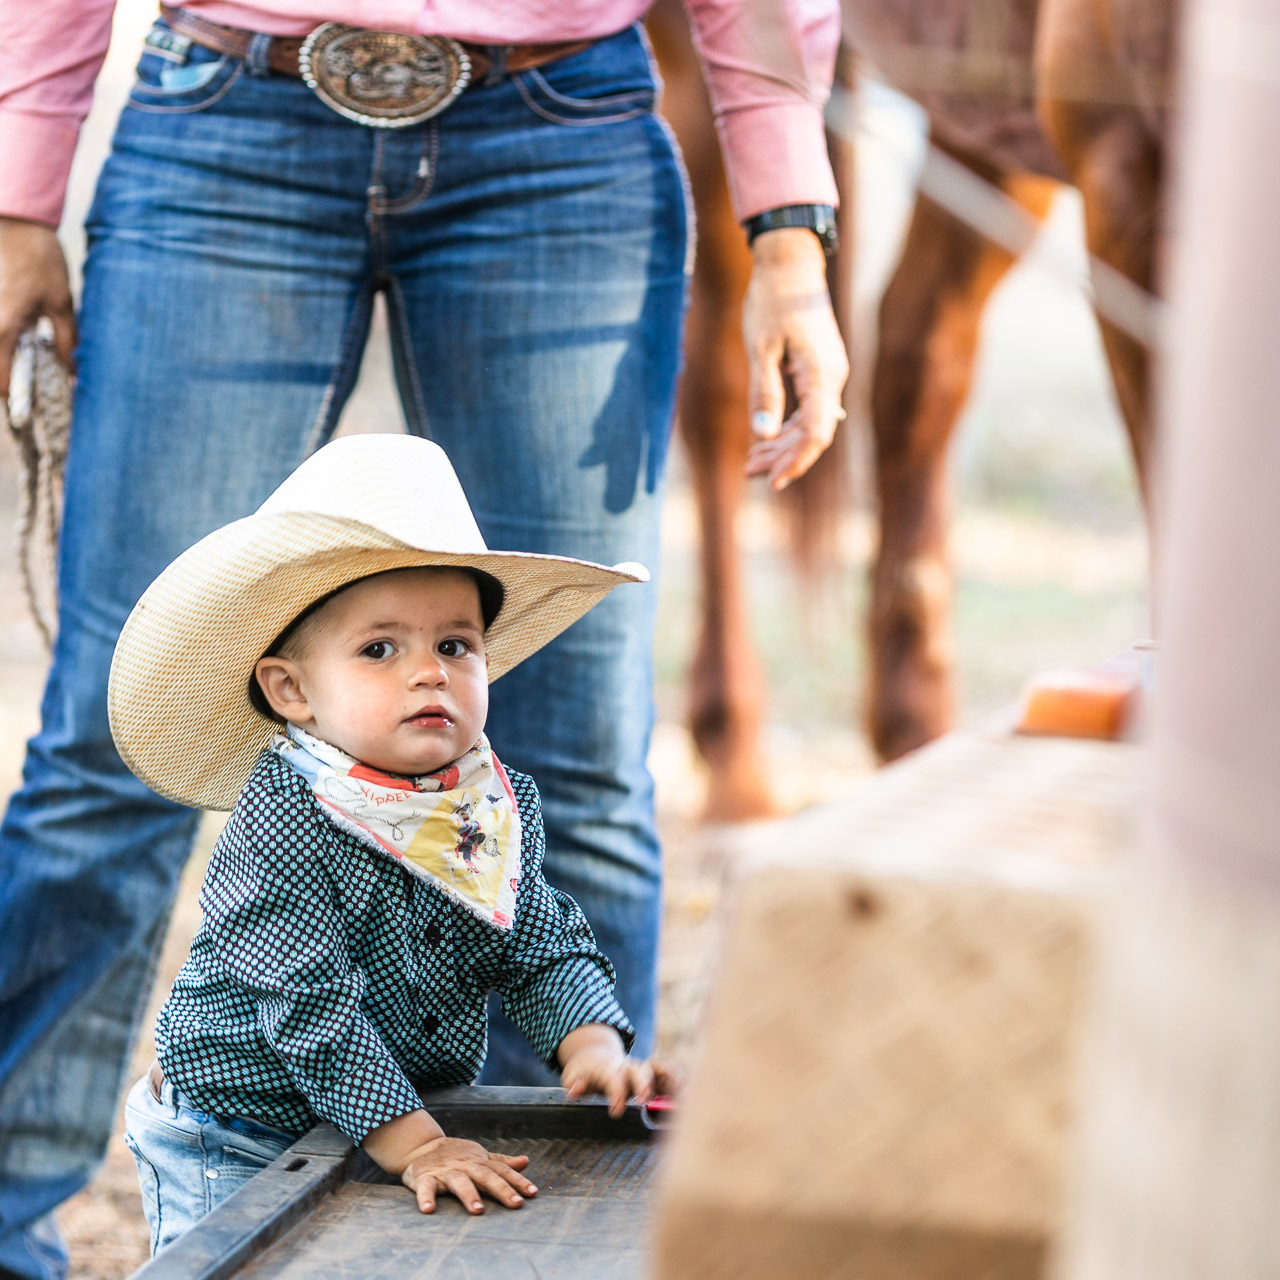 Baby dressed as a cowboy with his mum's legs and horse's legs behind him. Blue jeans and a big buckle.